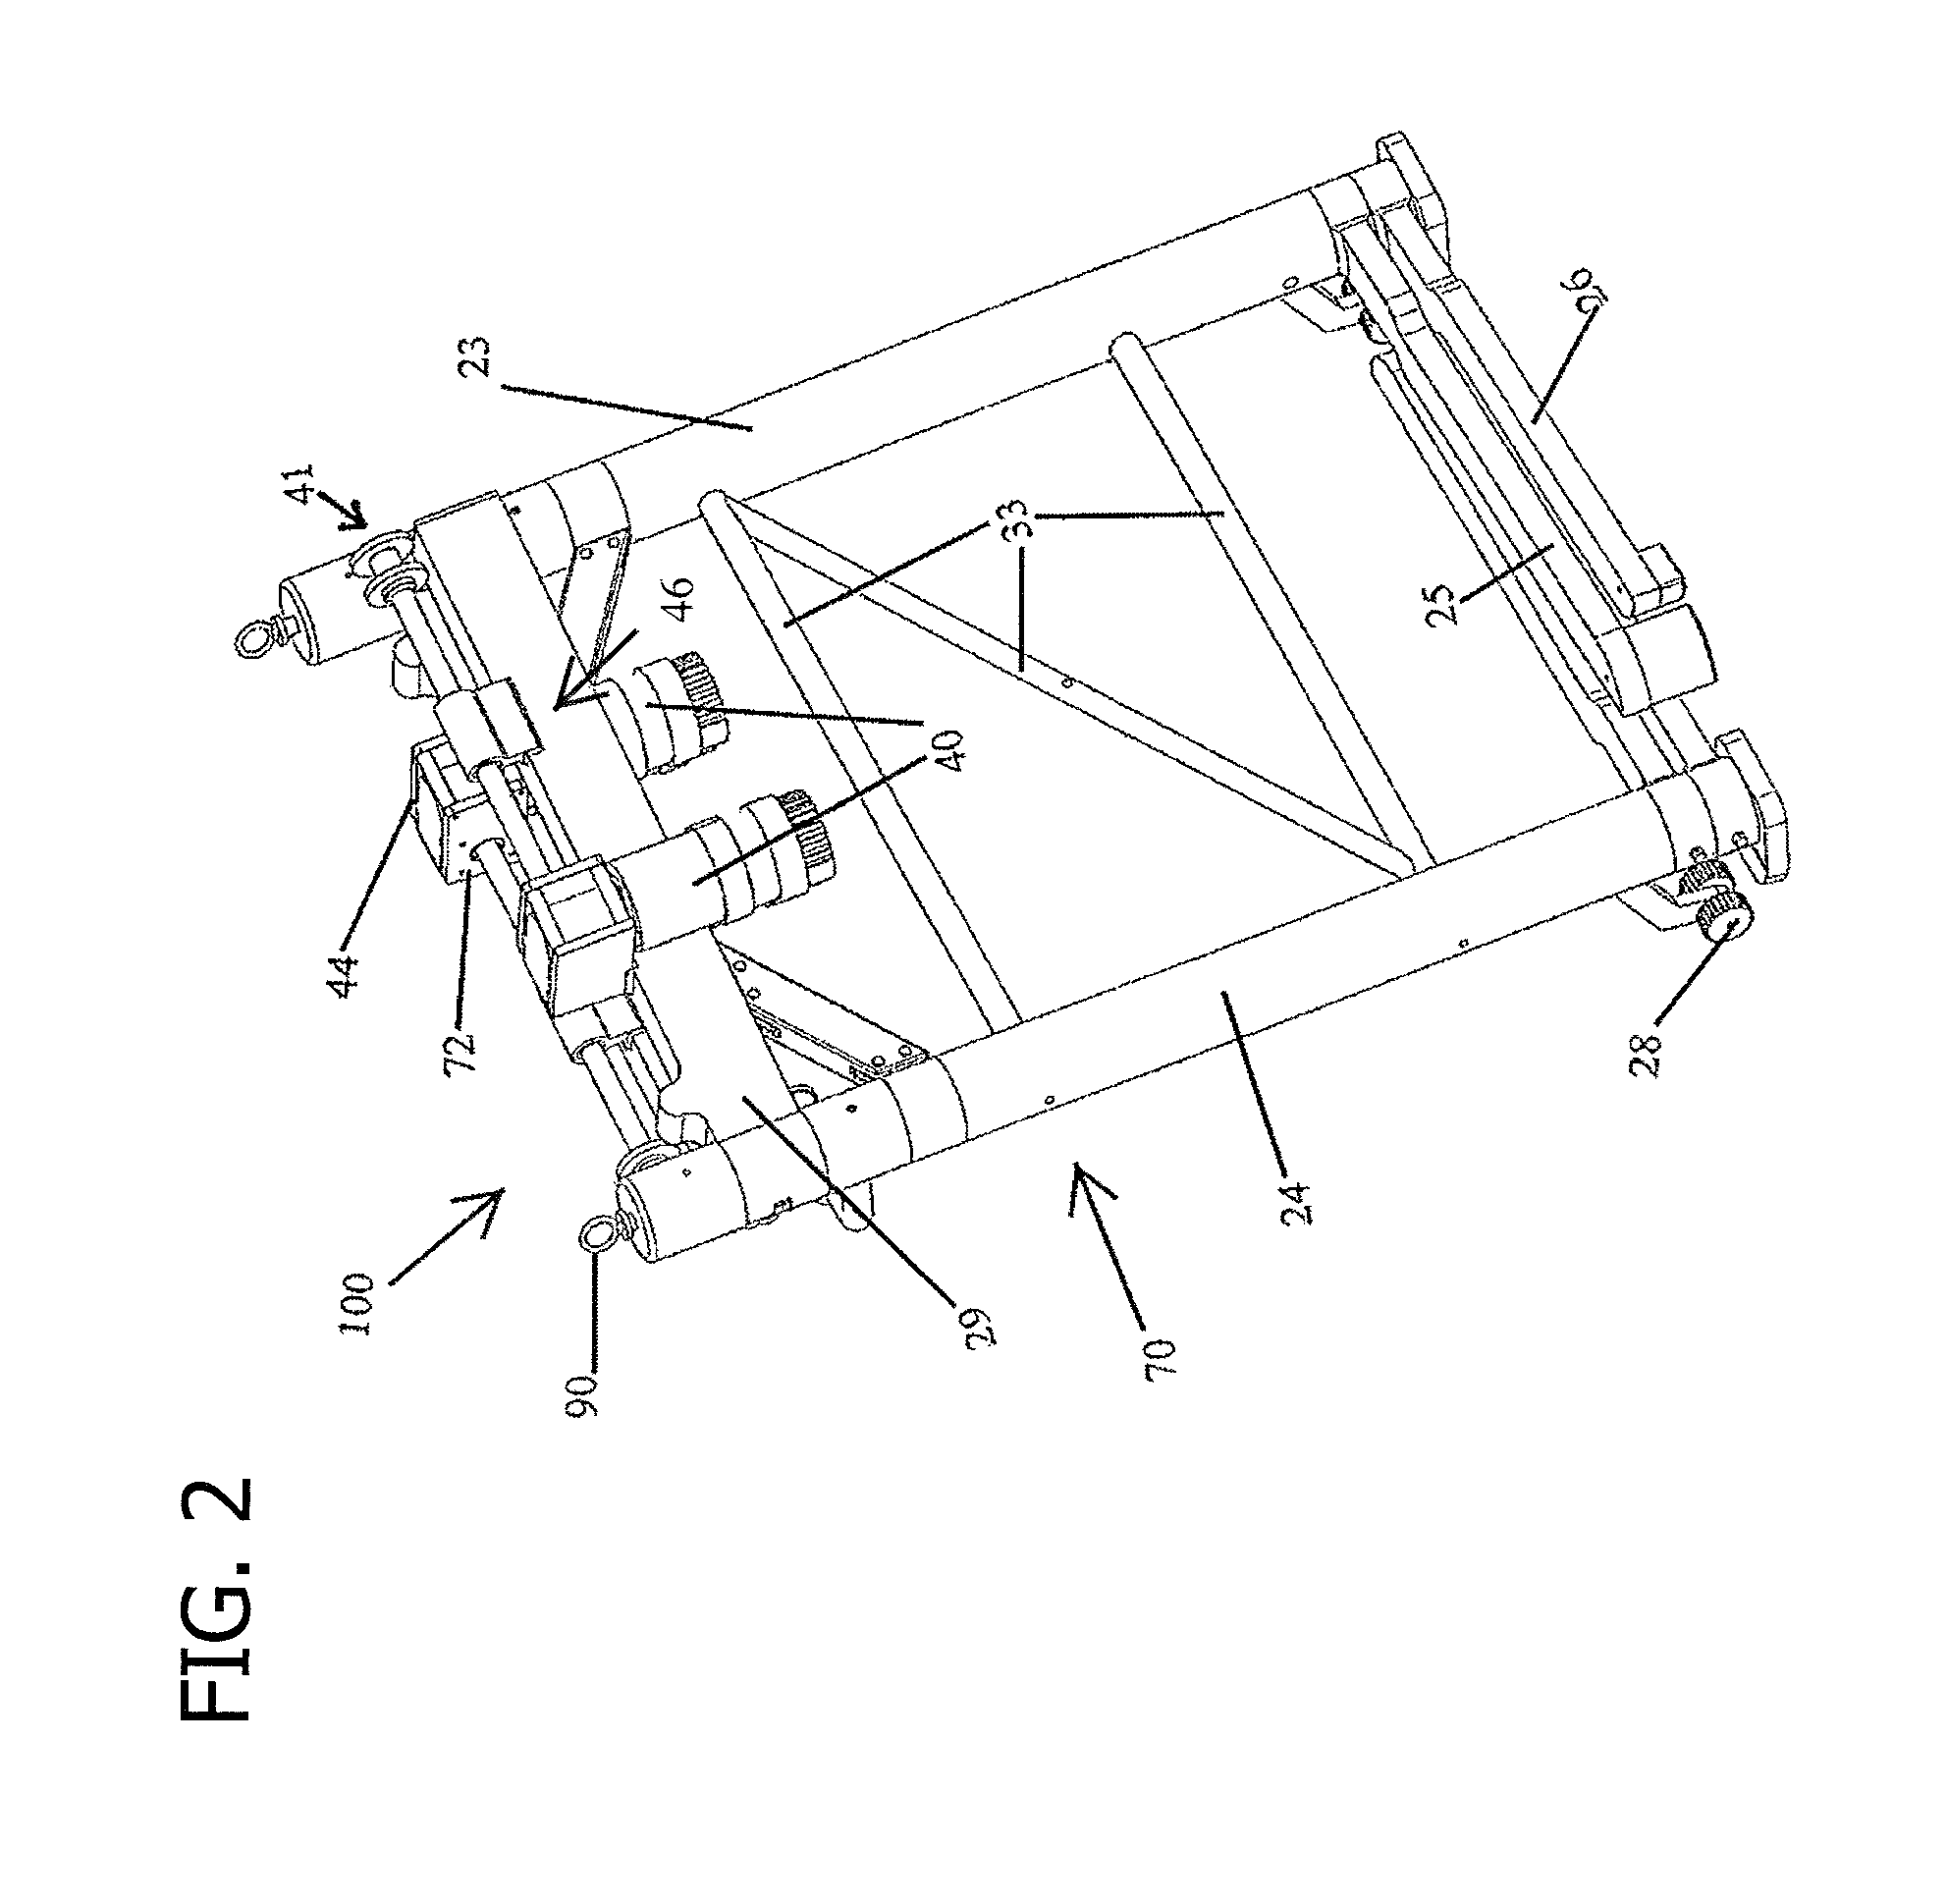 Stability controlled assistive lifting apparatus